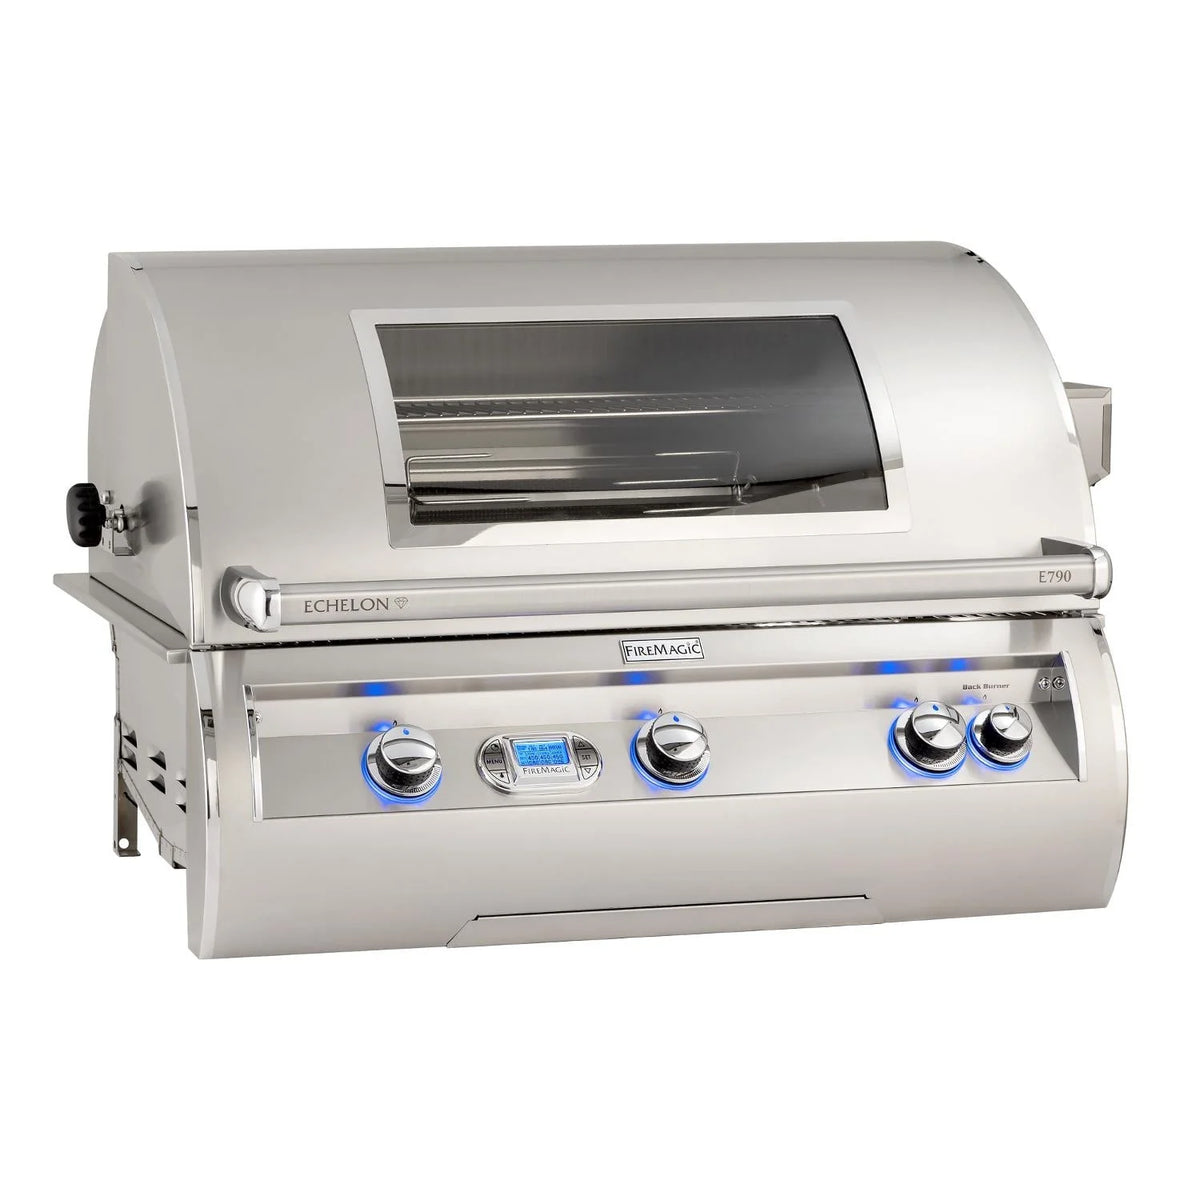 Fire Magic Echelon Diamond 36 Inch 3 Burner Built-In Gas Grill with Rotisserie and Digital Thermometer